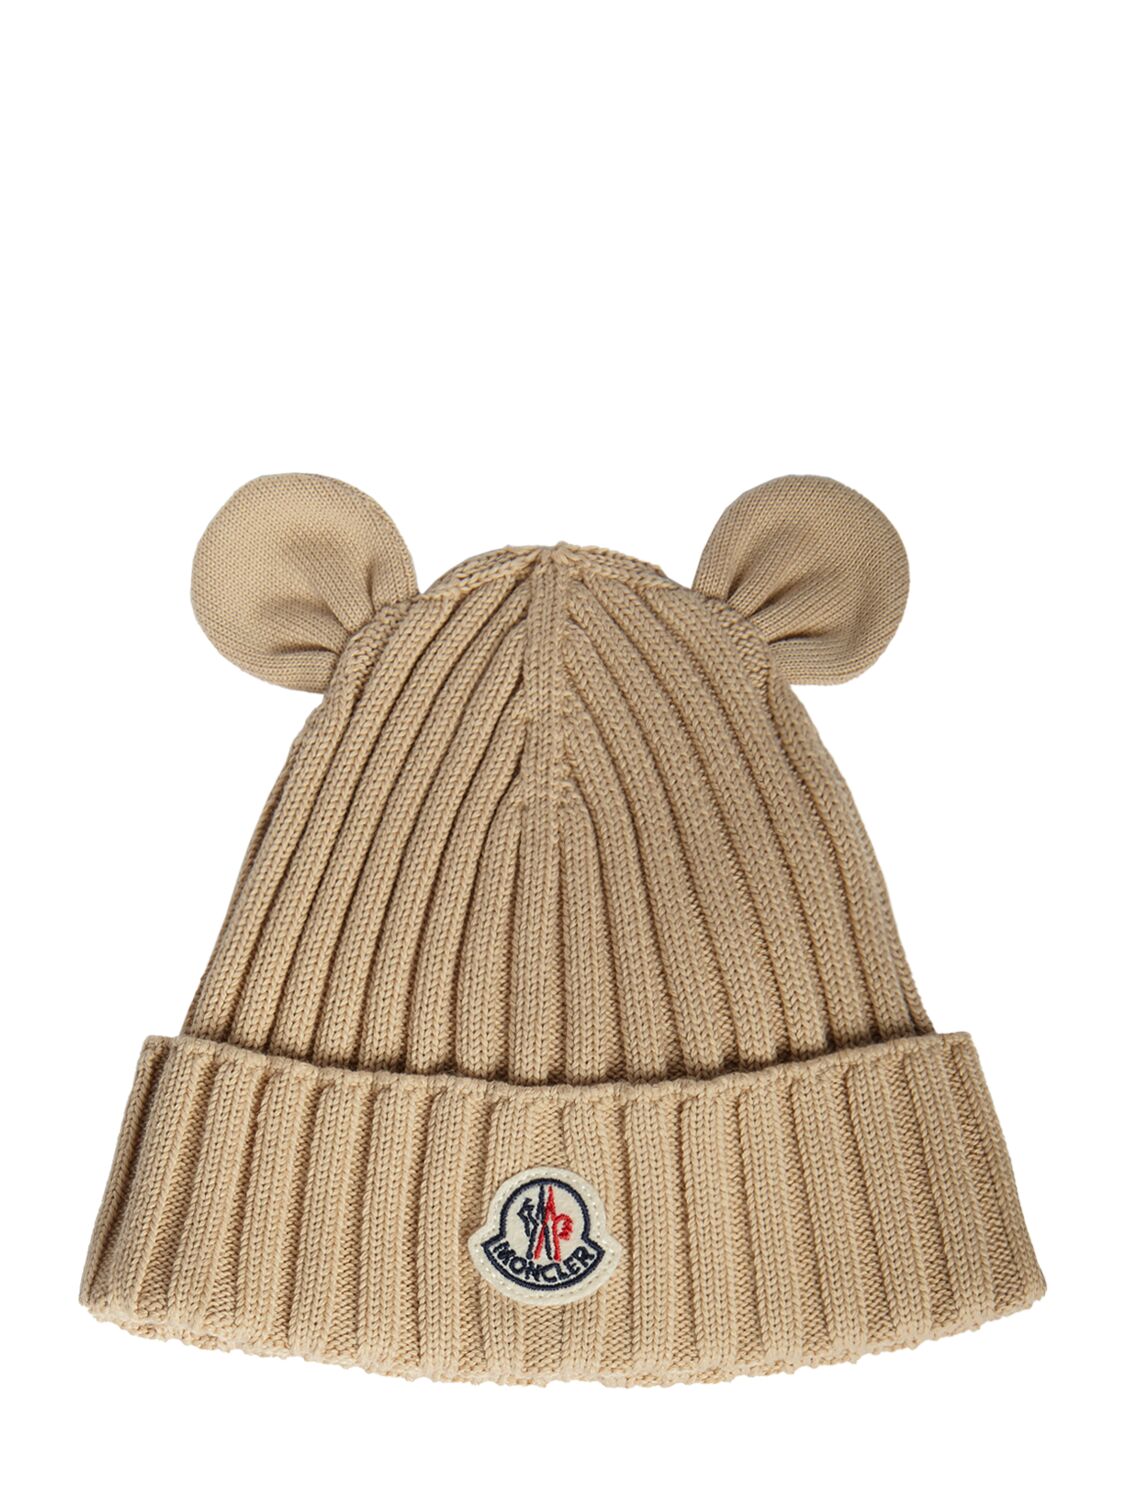 Image of Cotton Knit Beanie Hat With Ears